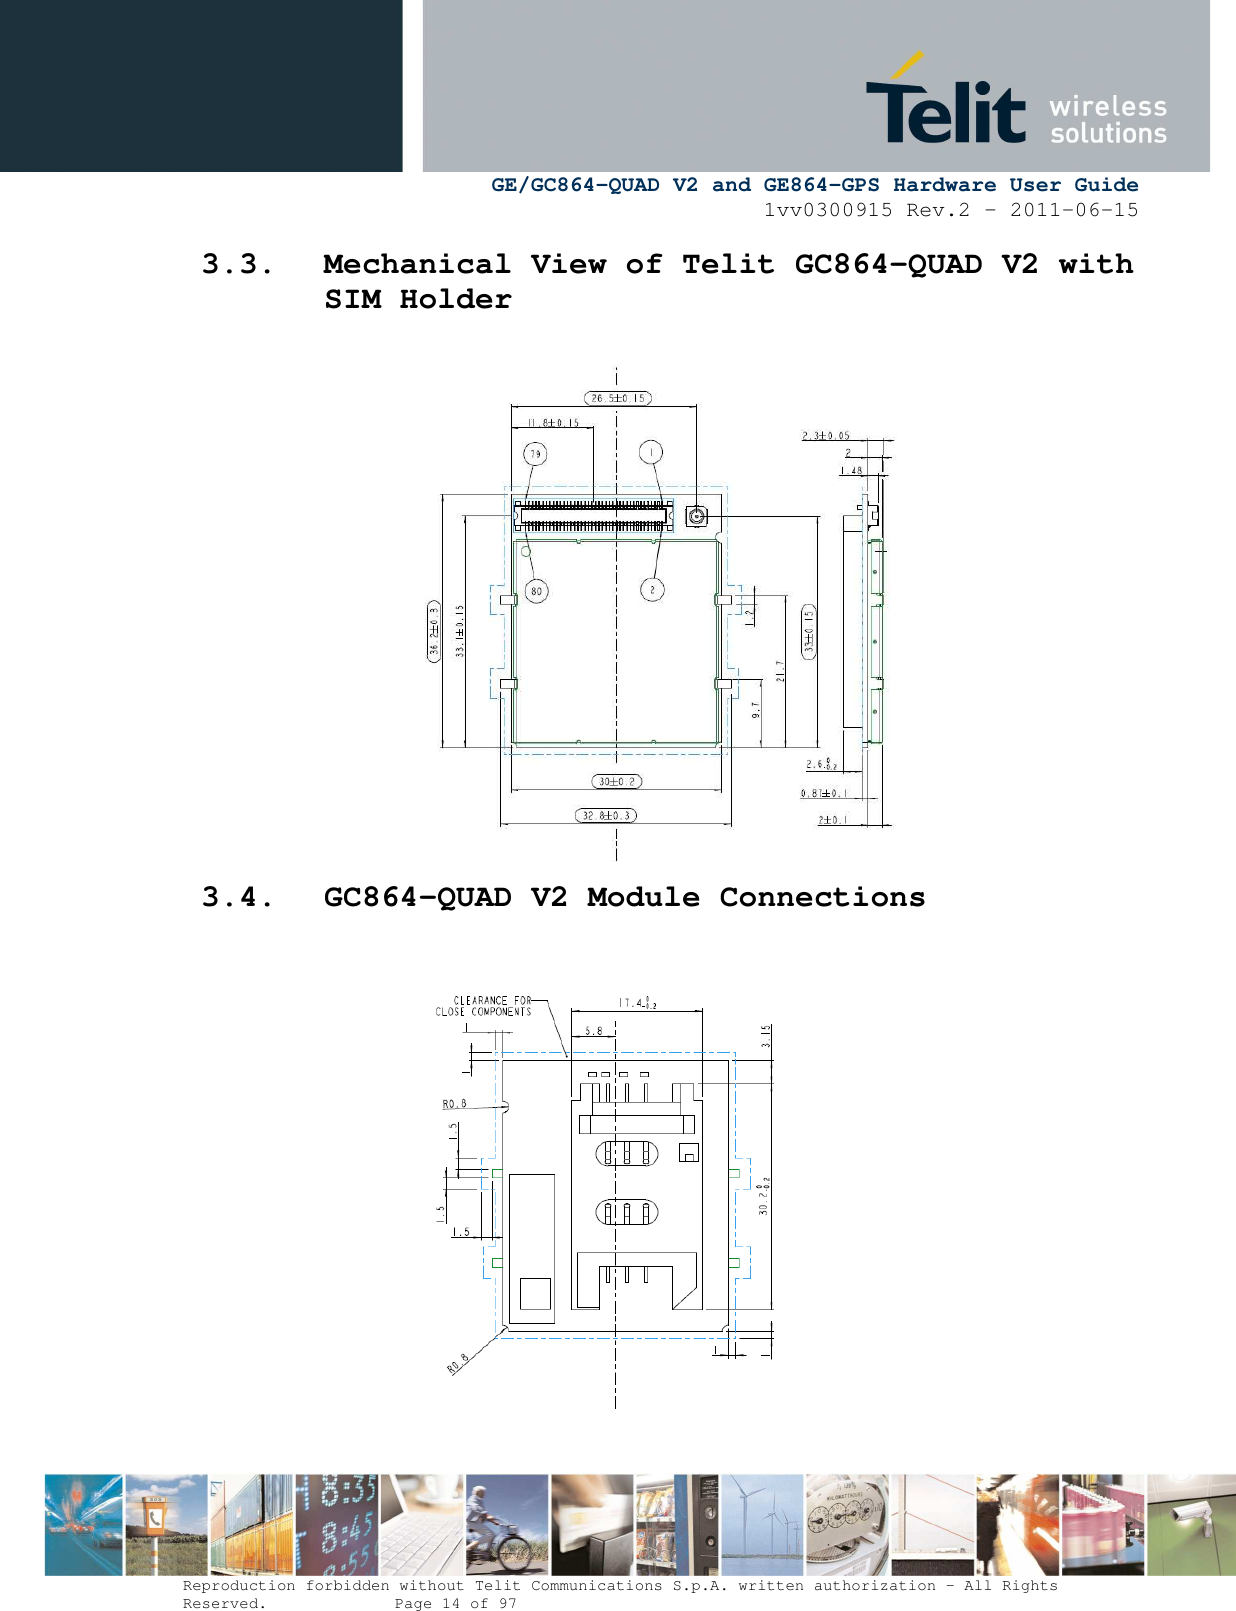      GE/GC864-QUAD V2 and GE864-GPS Hardware User Guide 1vv0300915 Rev.2 – 2011-06-15  Reproduction forbidden without Telit Communications S.p.A. written authorization - All Rights Reserved.    Page 14 of 97  3.3. Mechanical View of Telit GC864-QUAD V2 with SIM Holder 3.4. GC864-QUAD V2 Module Connections  